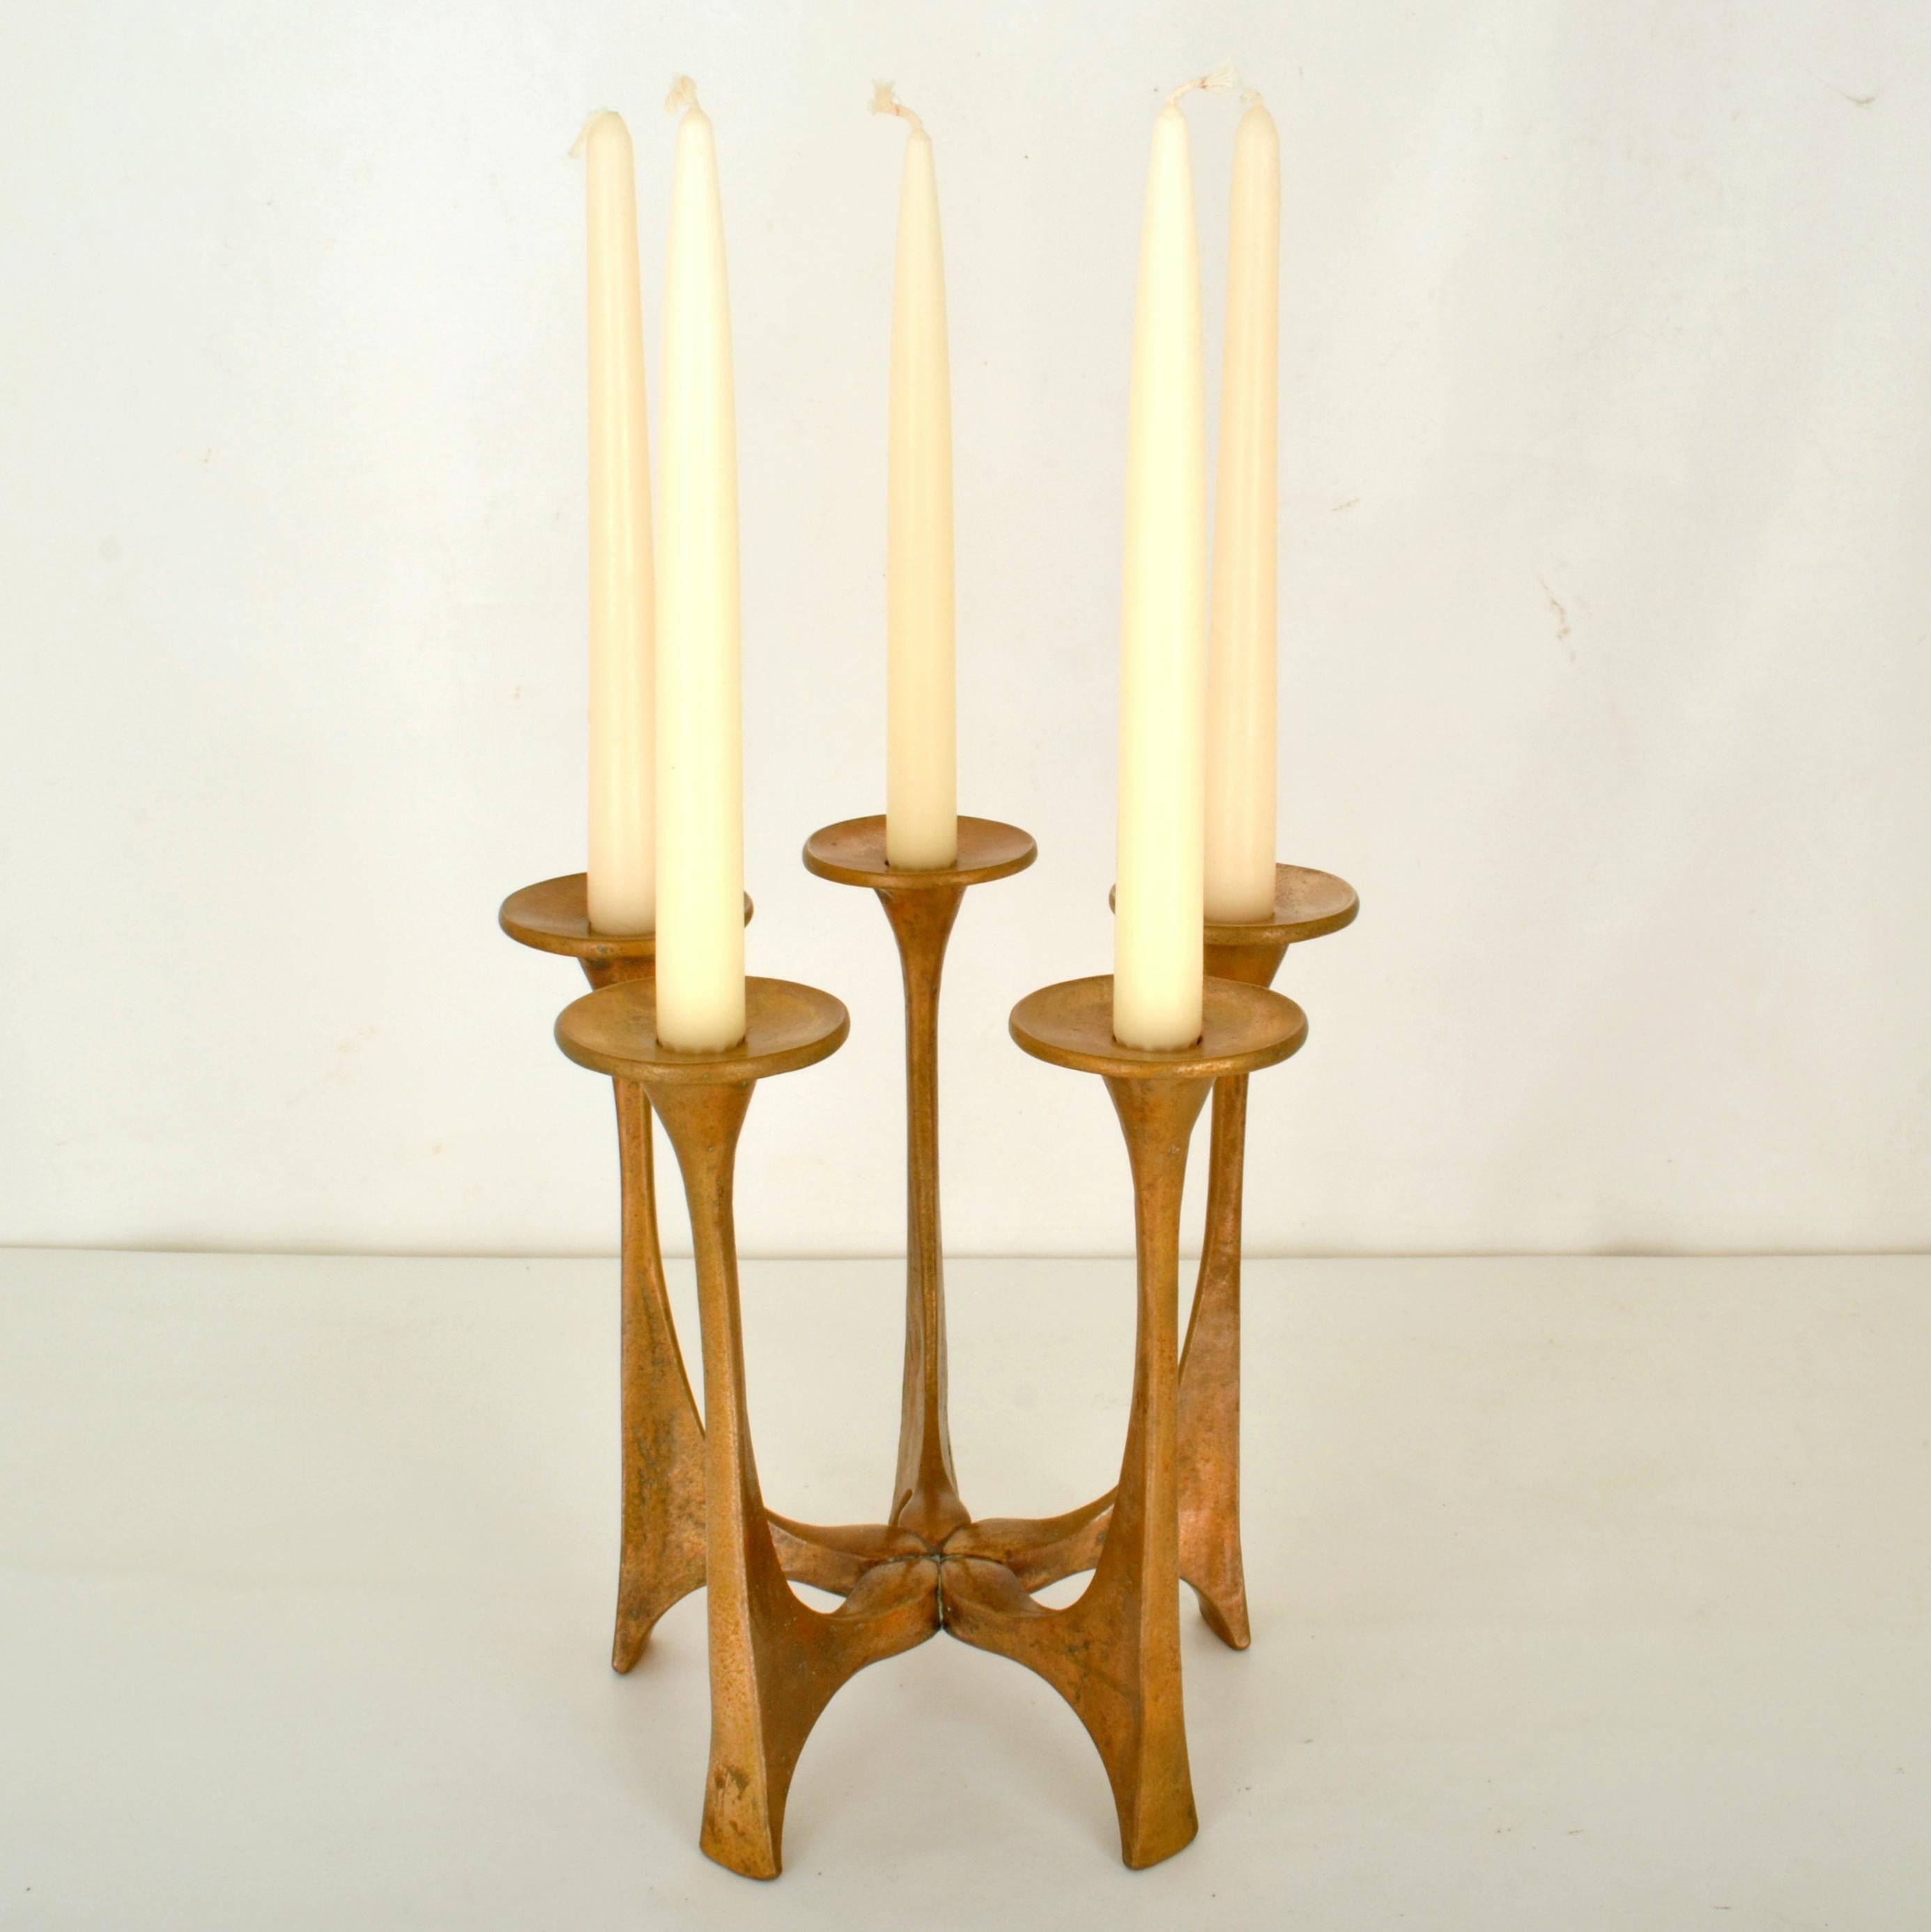 Bronze cast candelabra composed of five radiating cast-bronze arms with saucer shaped candle holders. It is designed by Michael Harjes (1926-2006) and produced by Harjes Metalkunst (1912), the family business in Germany. The candle holder is in